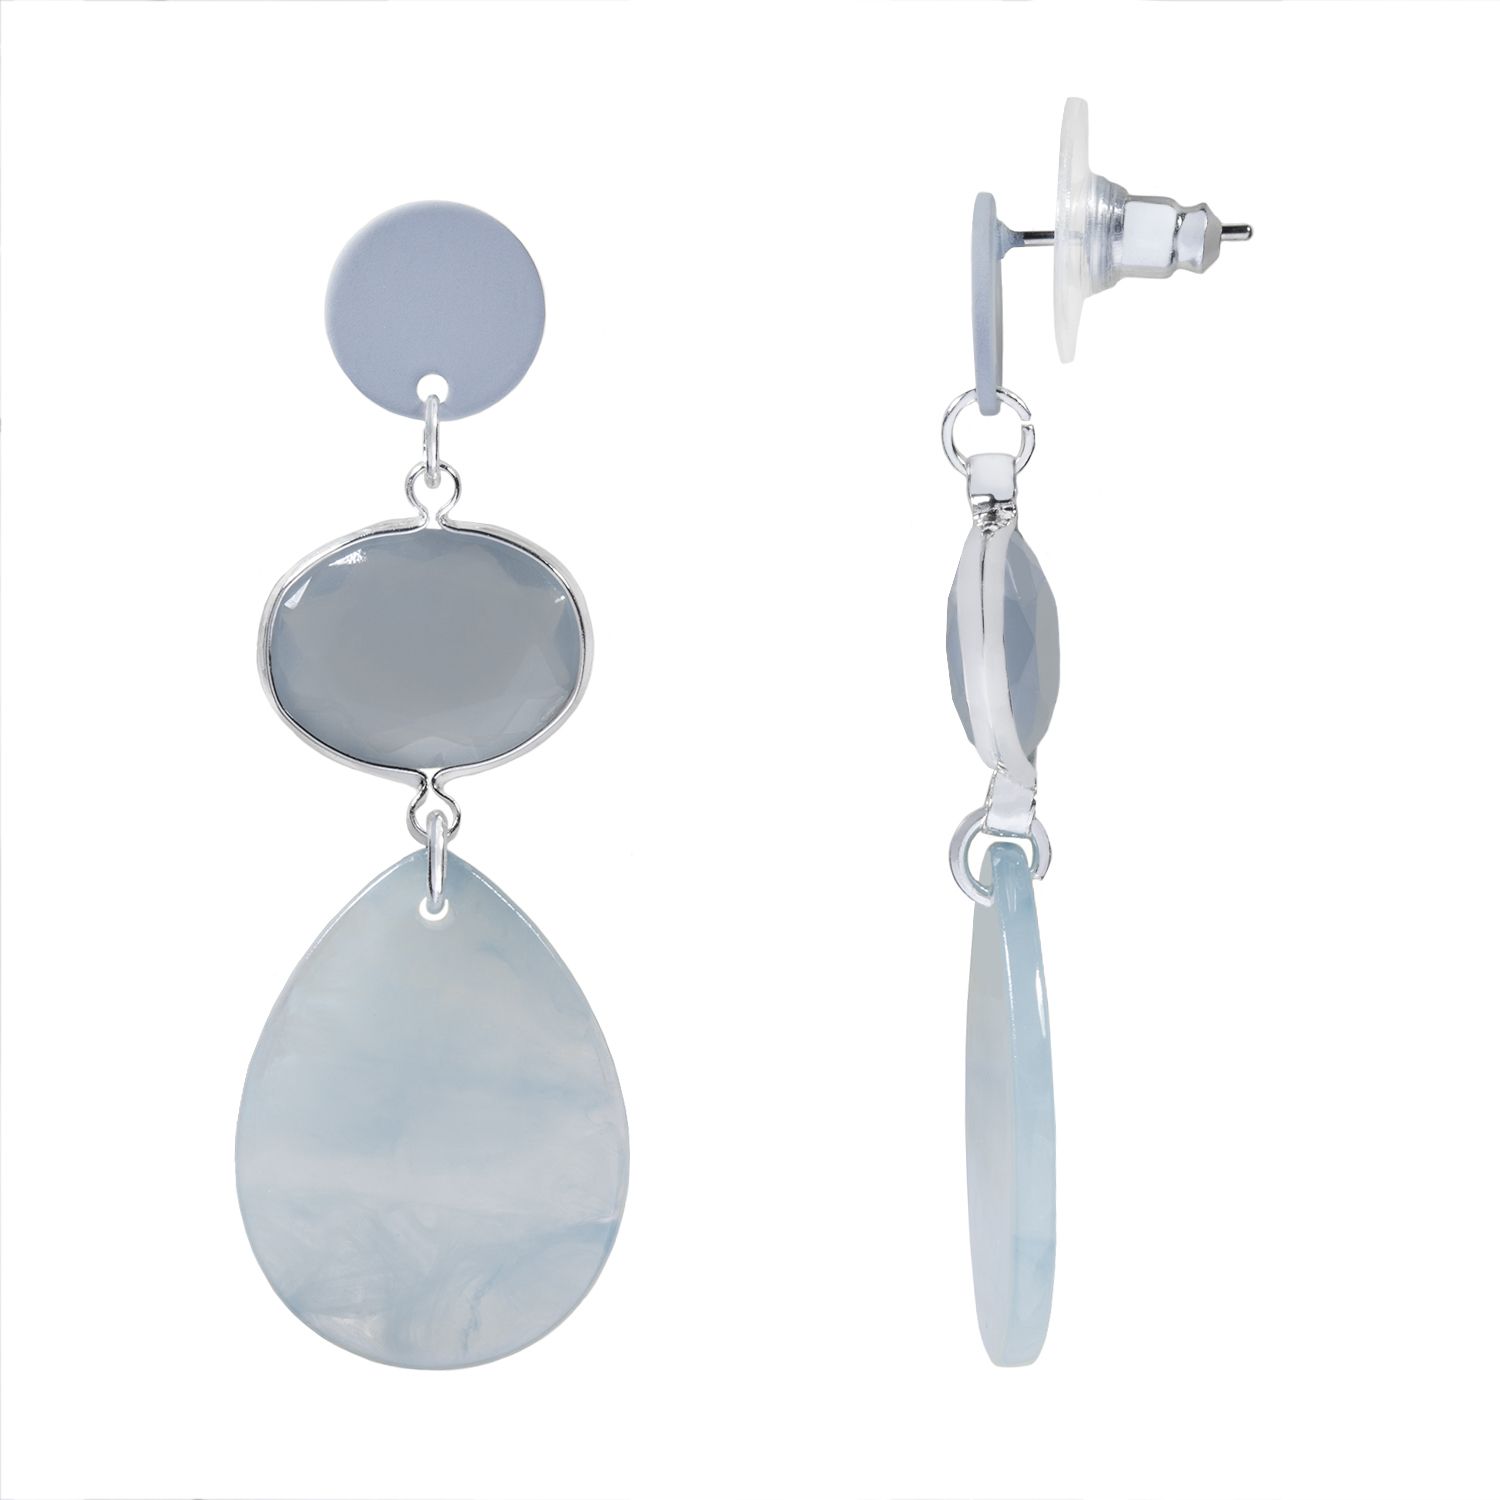 Image for LC Lauren Conrad Silver Tone Three-Tiered Resin Nickel Free Drop Earrings at Kohl's.